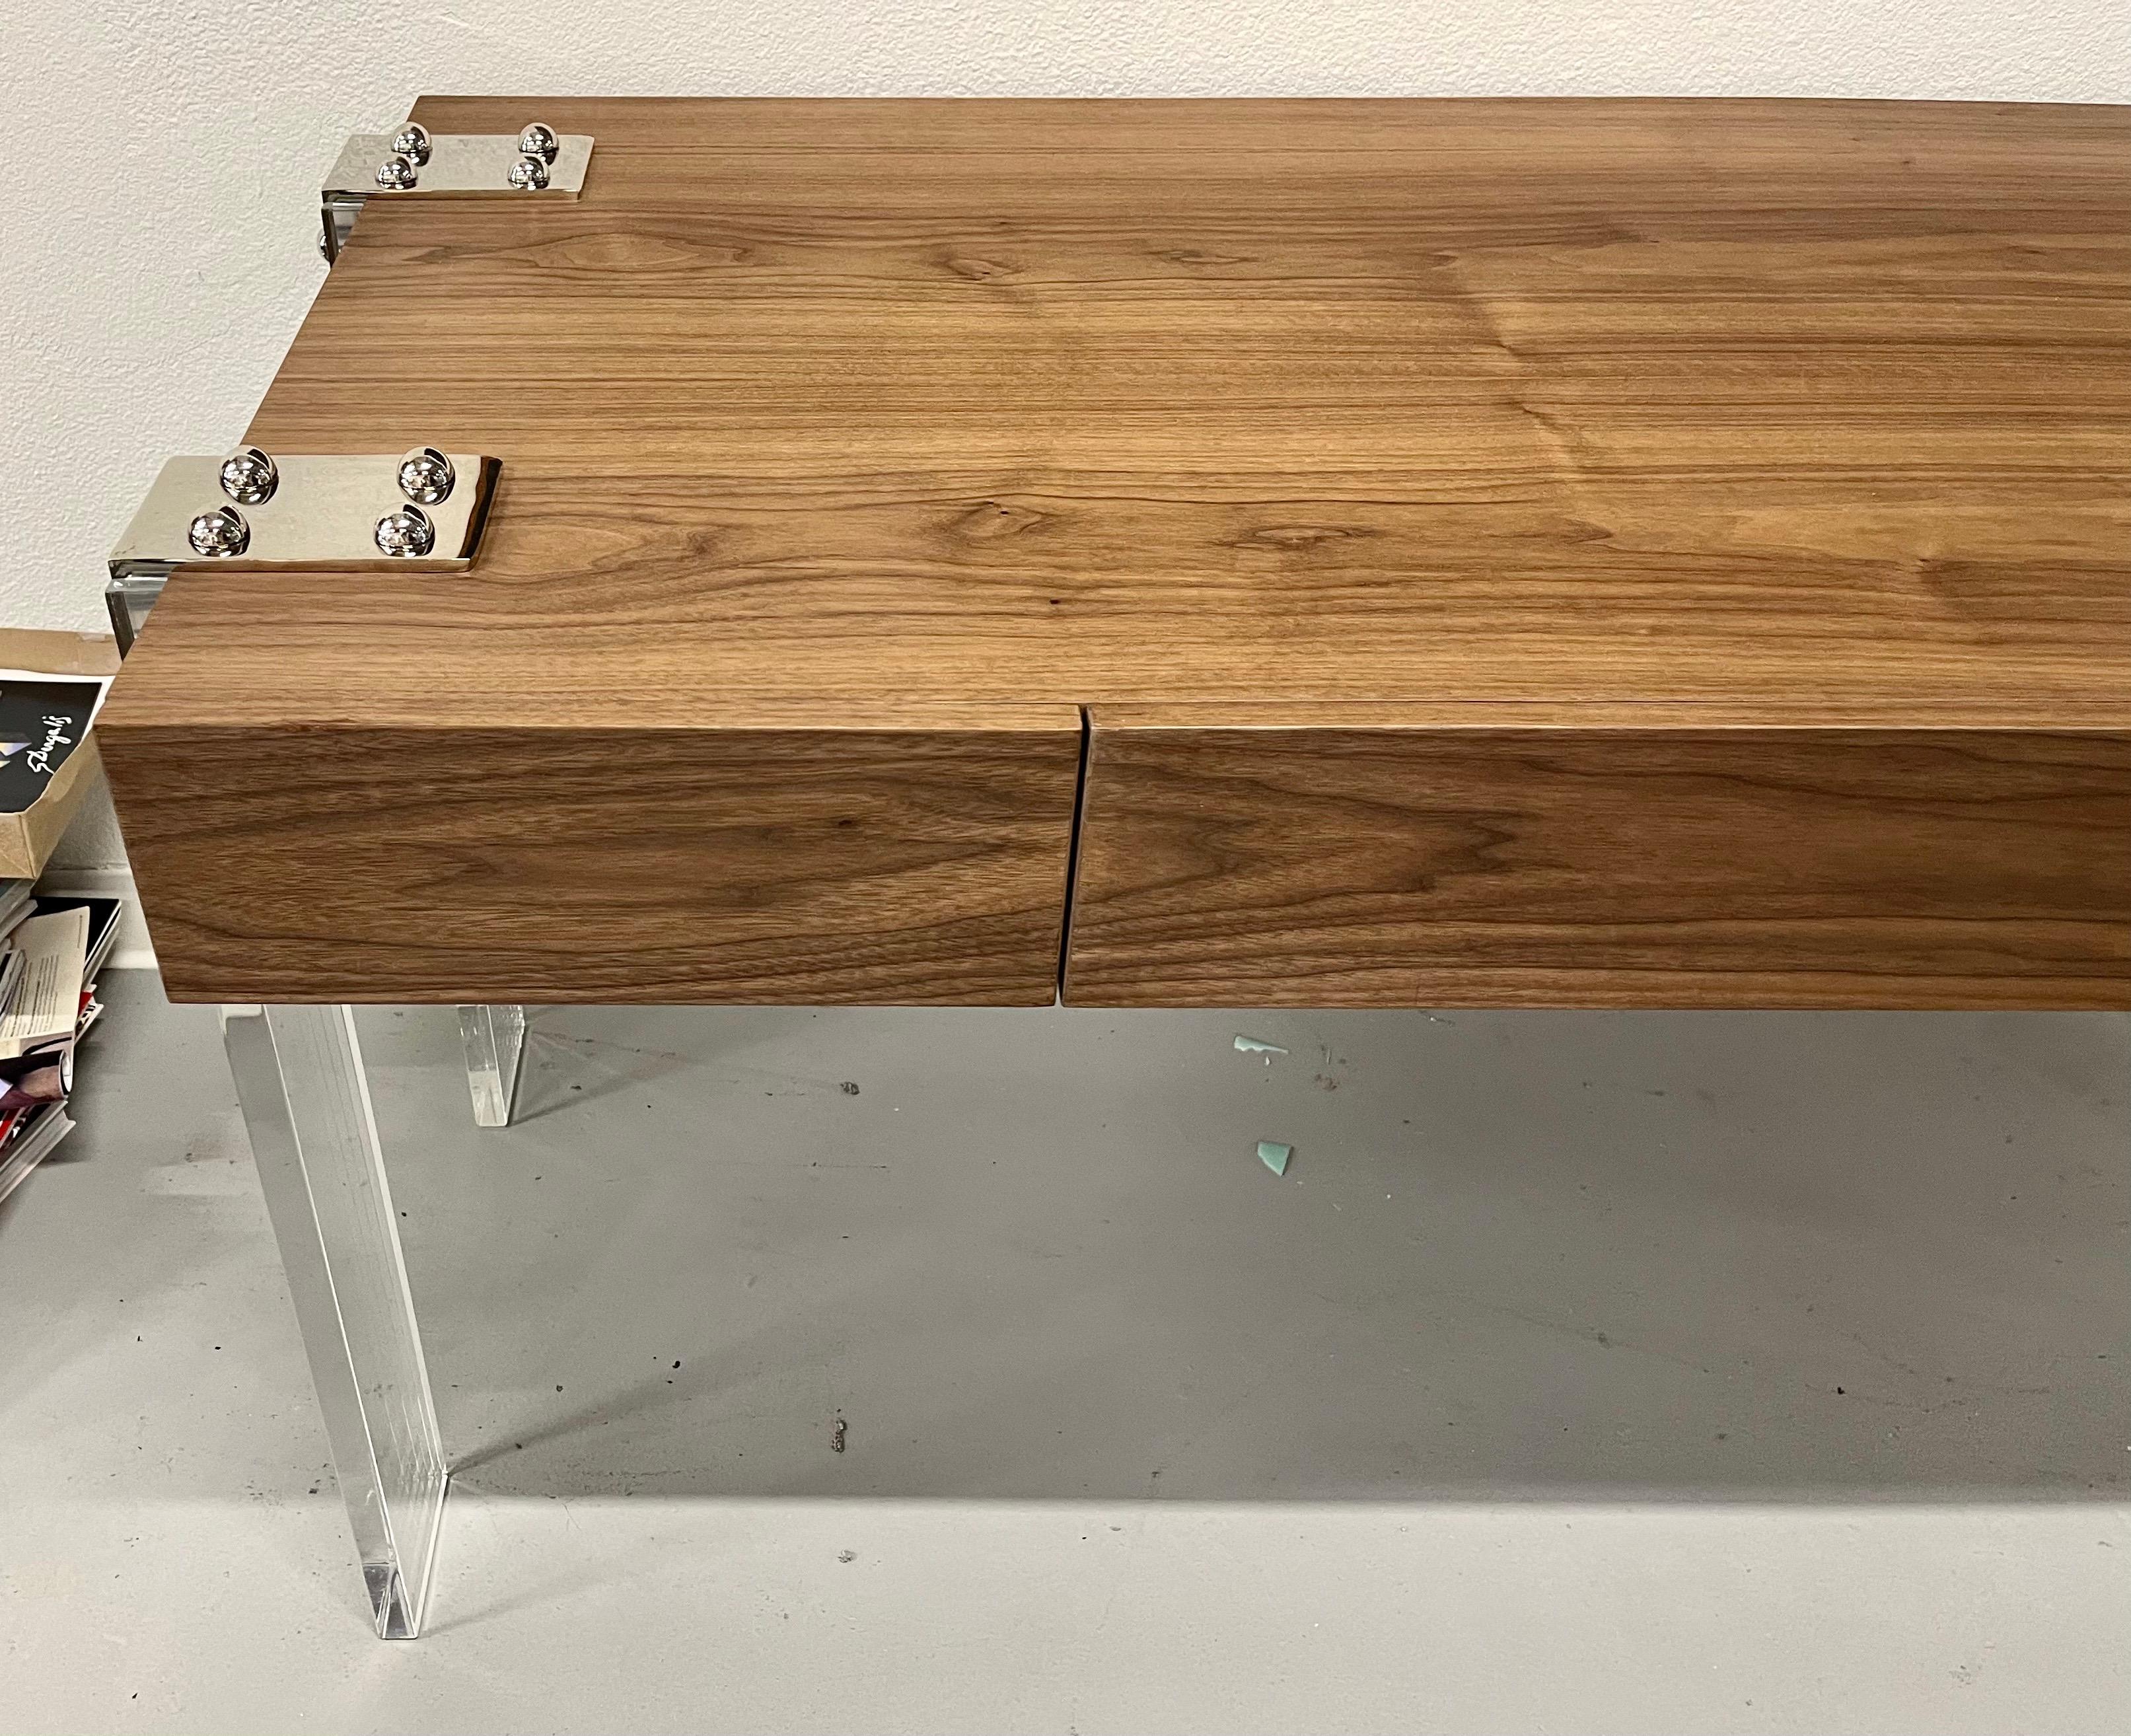 A beautiful custom crafted desk in walnut with Lucite legs and Chrome trim. Elegant and finished on the back with three drawers on the front. 57 inches wide to the outside of the legs, 30 5/8 deep and 29 1/4 tall.